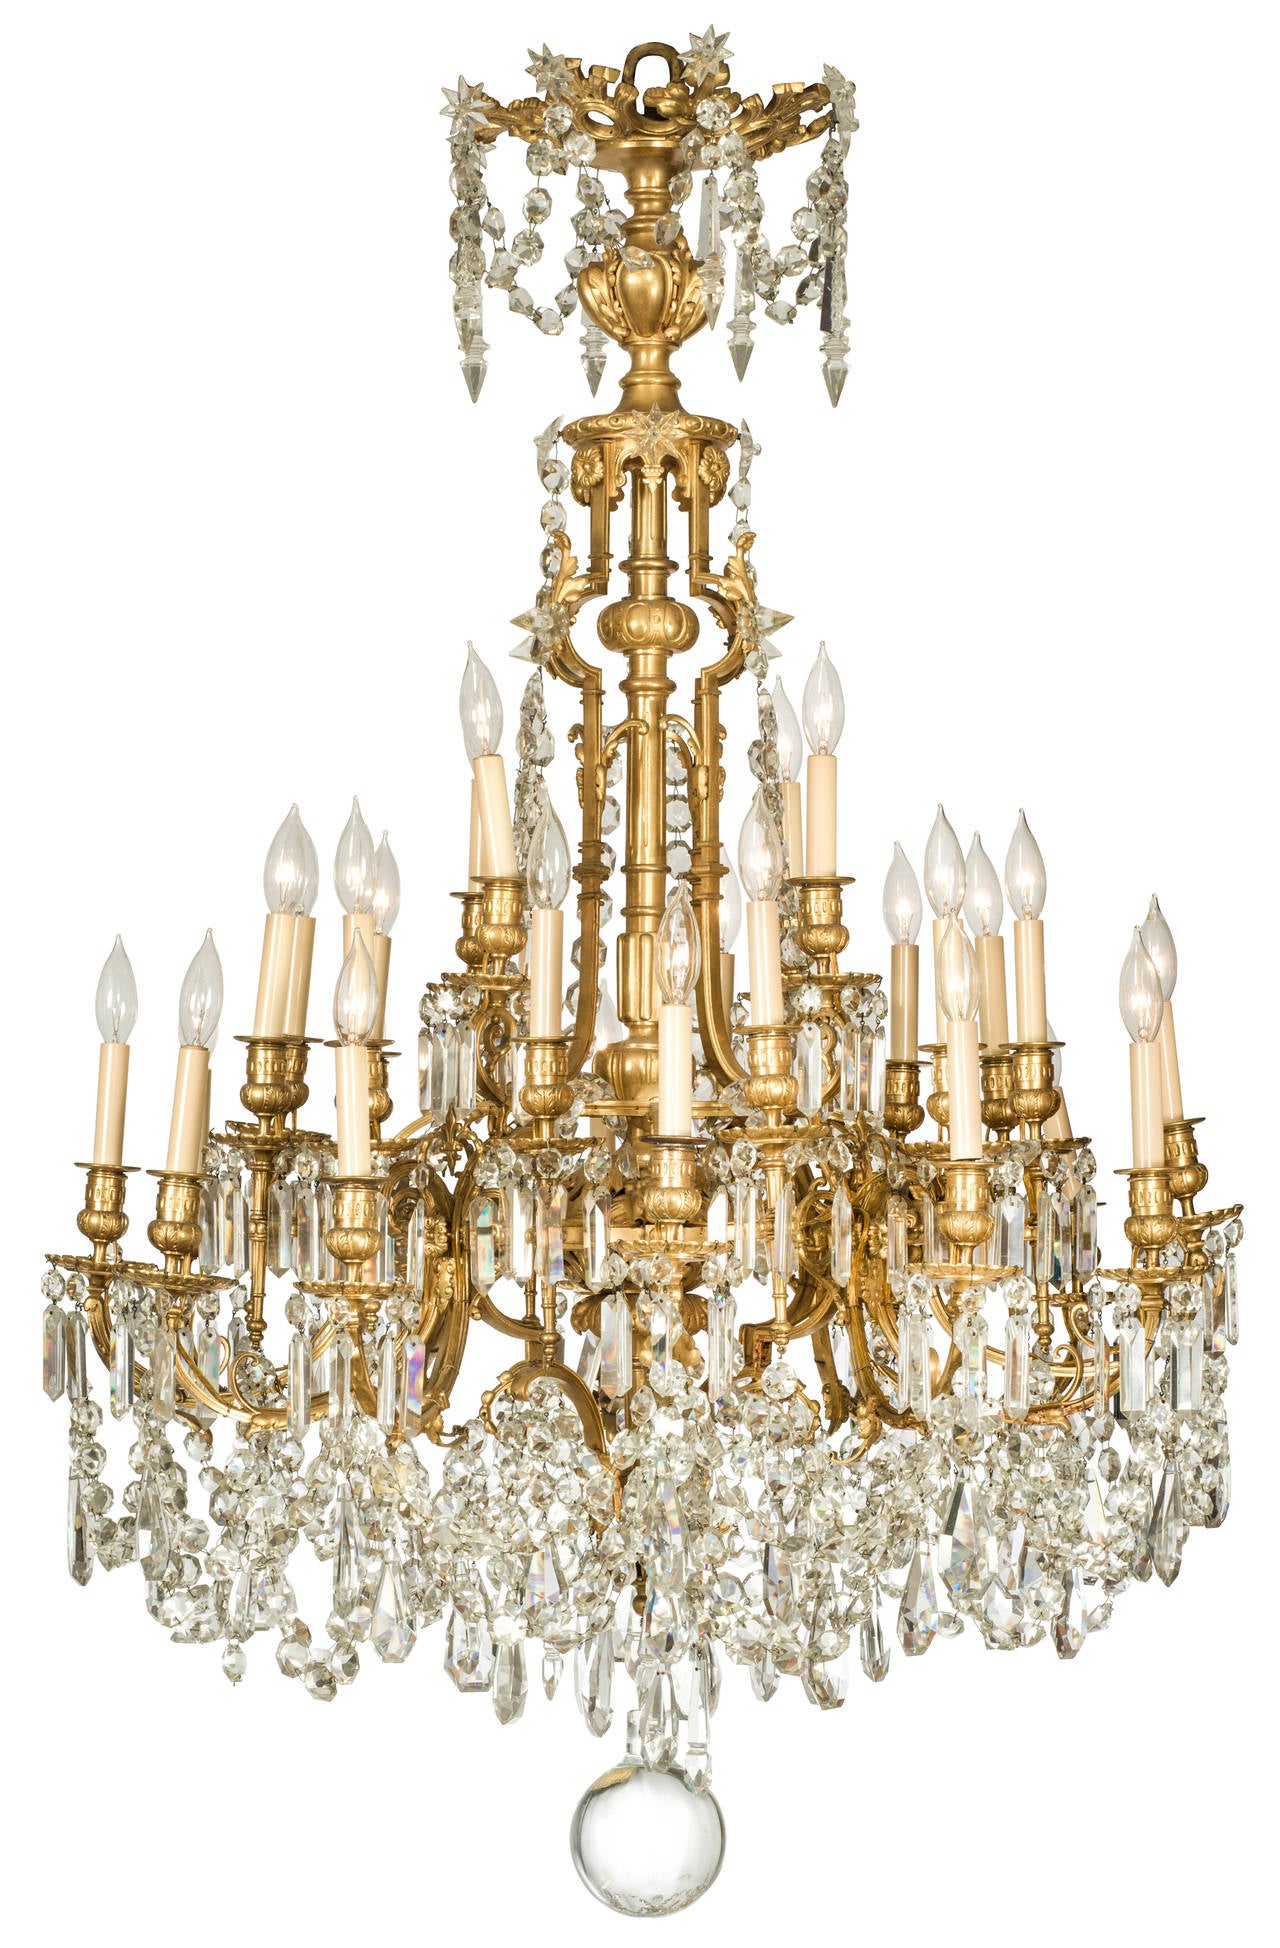 C. 1850s. Fabulous 32 light  Bronze Dore frame Baccarat crystal chandeliers.
Rewired  for U S rating.  In perfect condition.